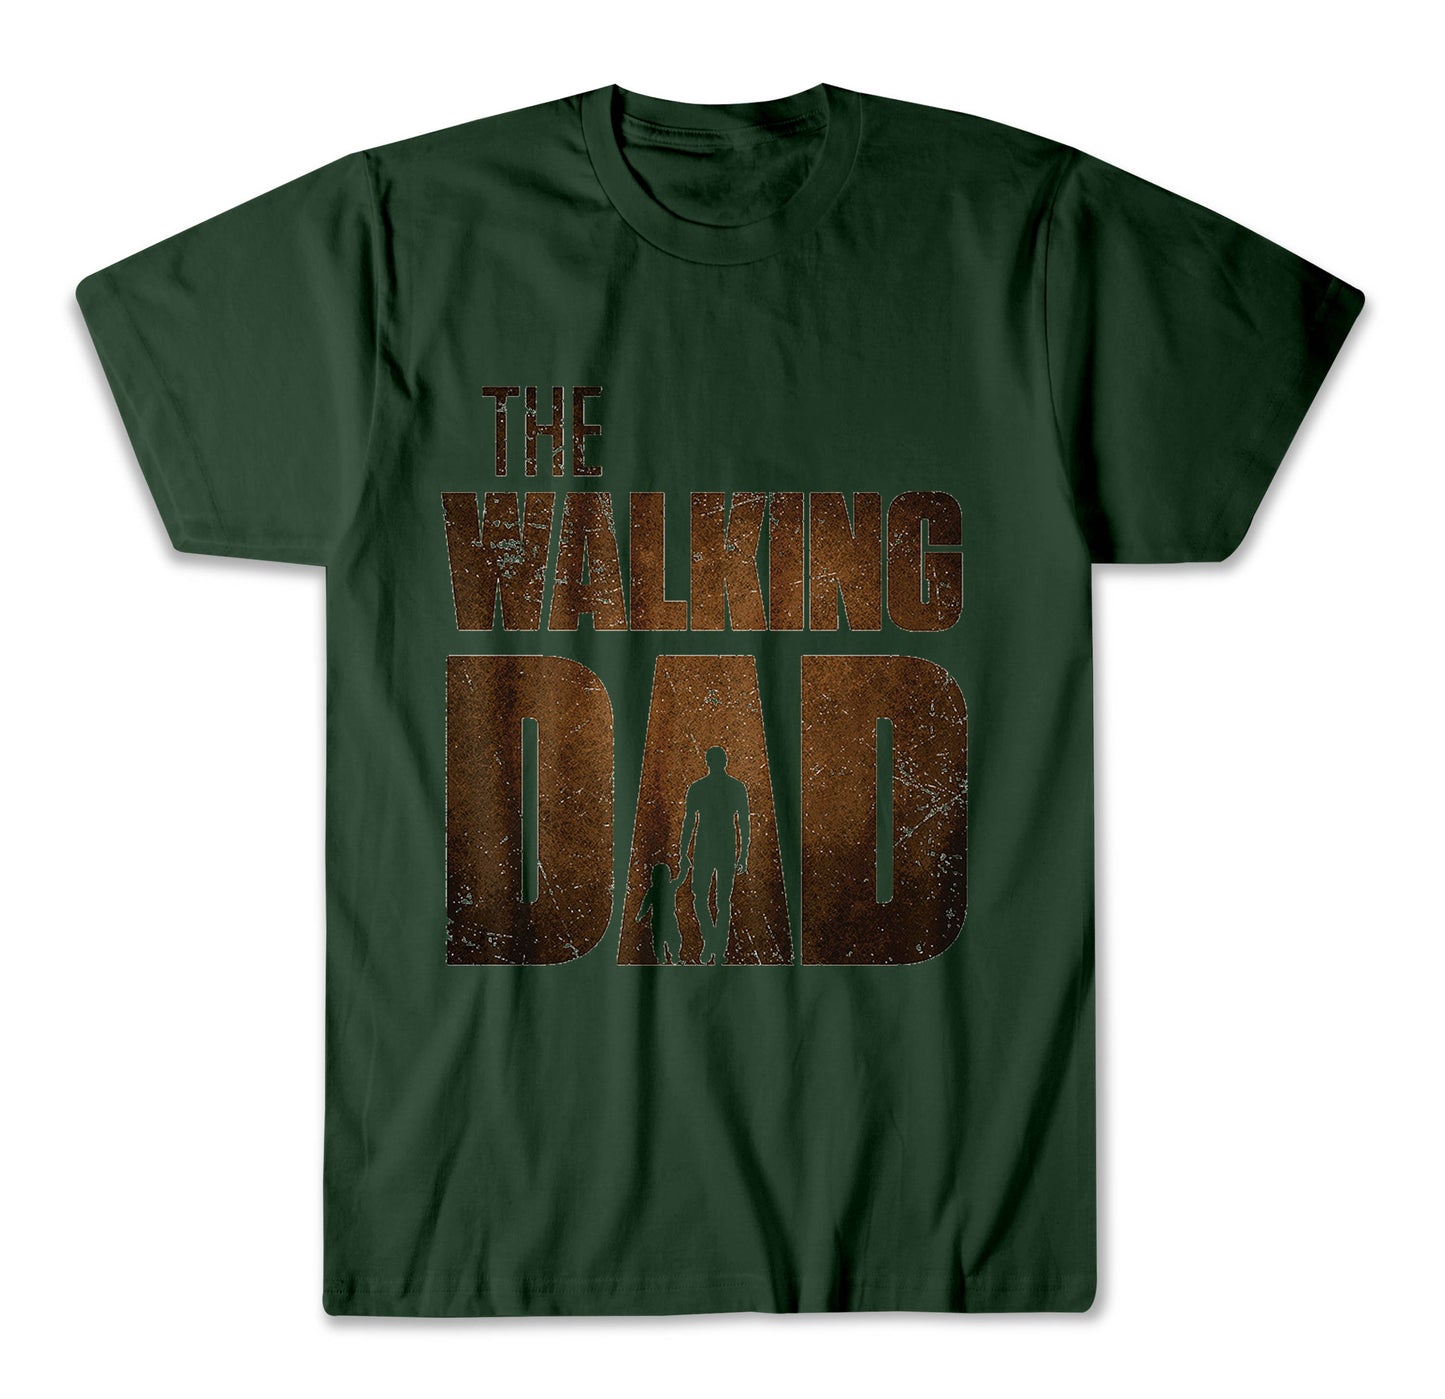 Father's Day World's The Walking Dad T Shirt KP5